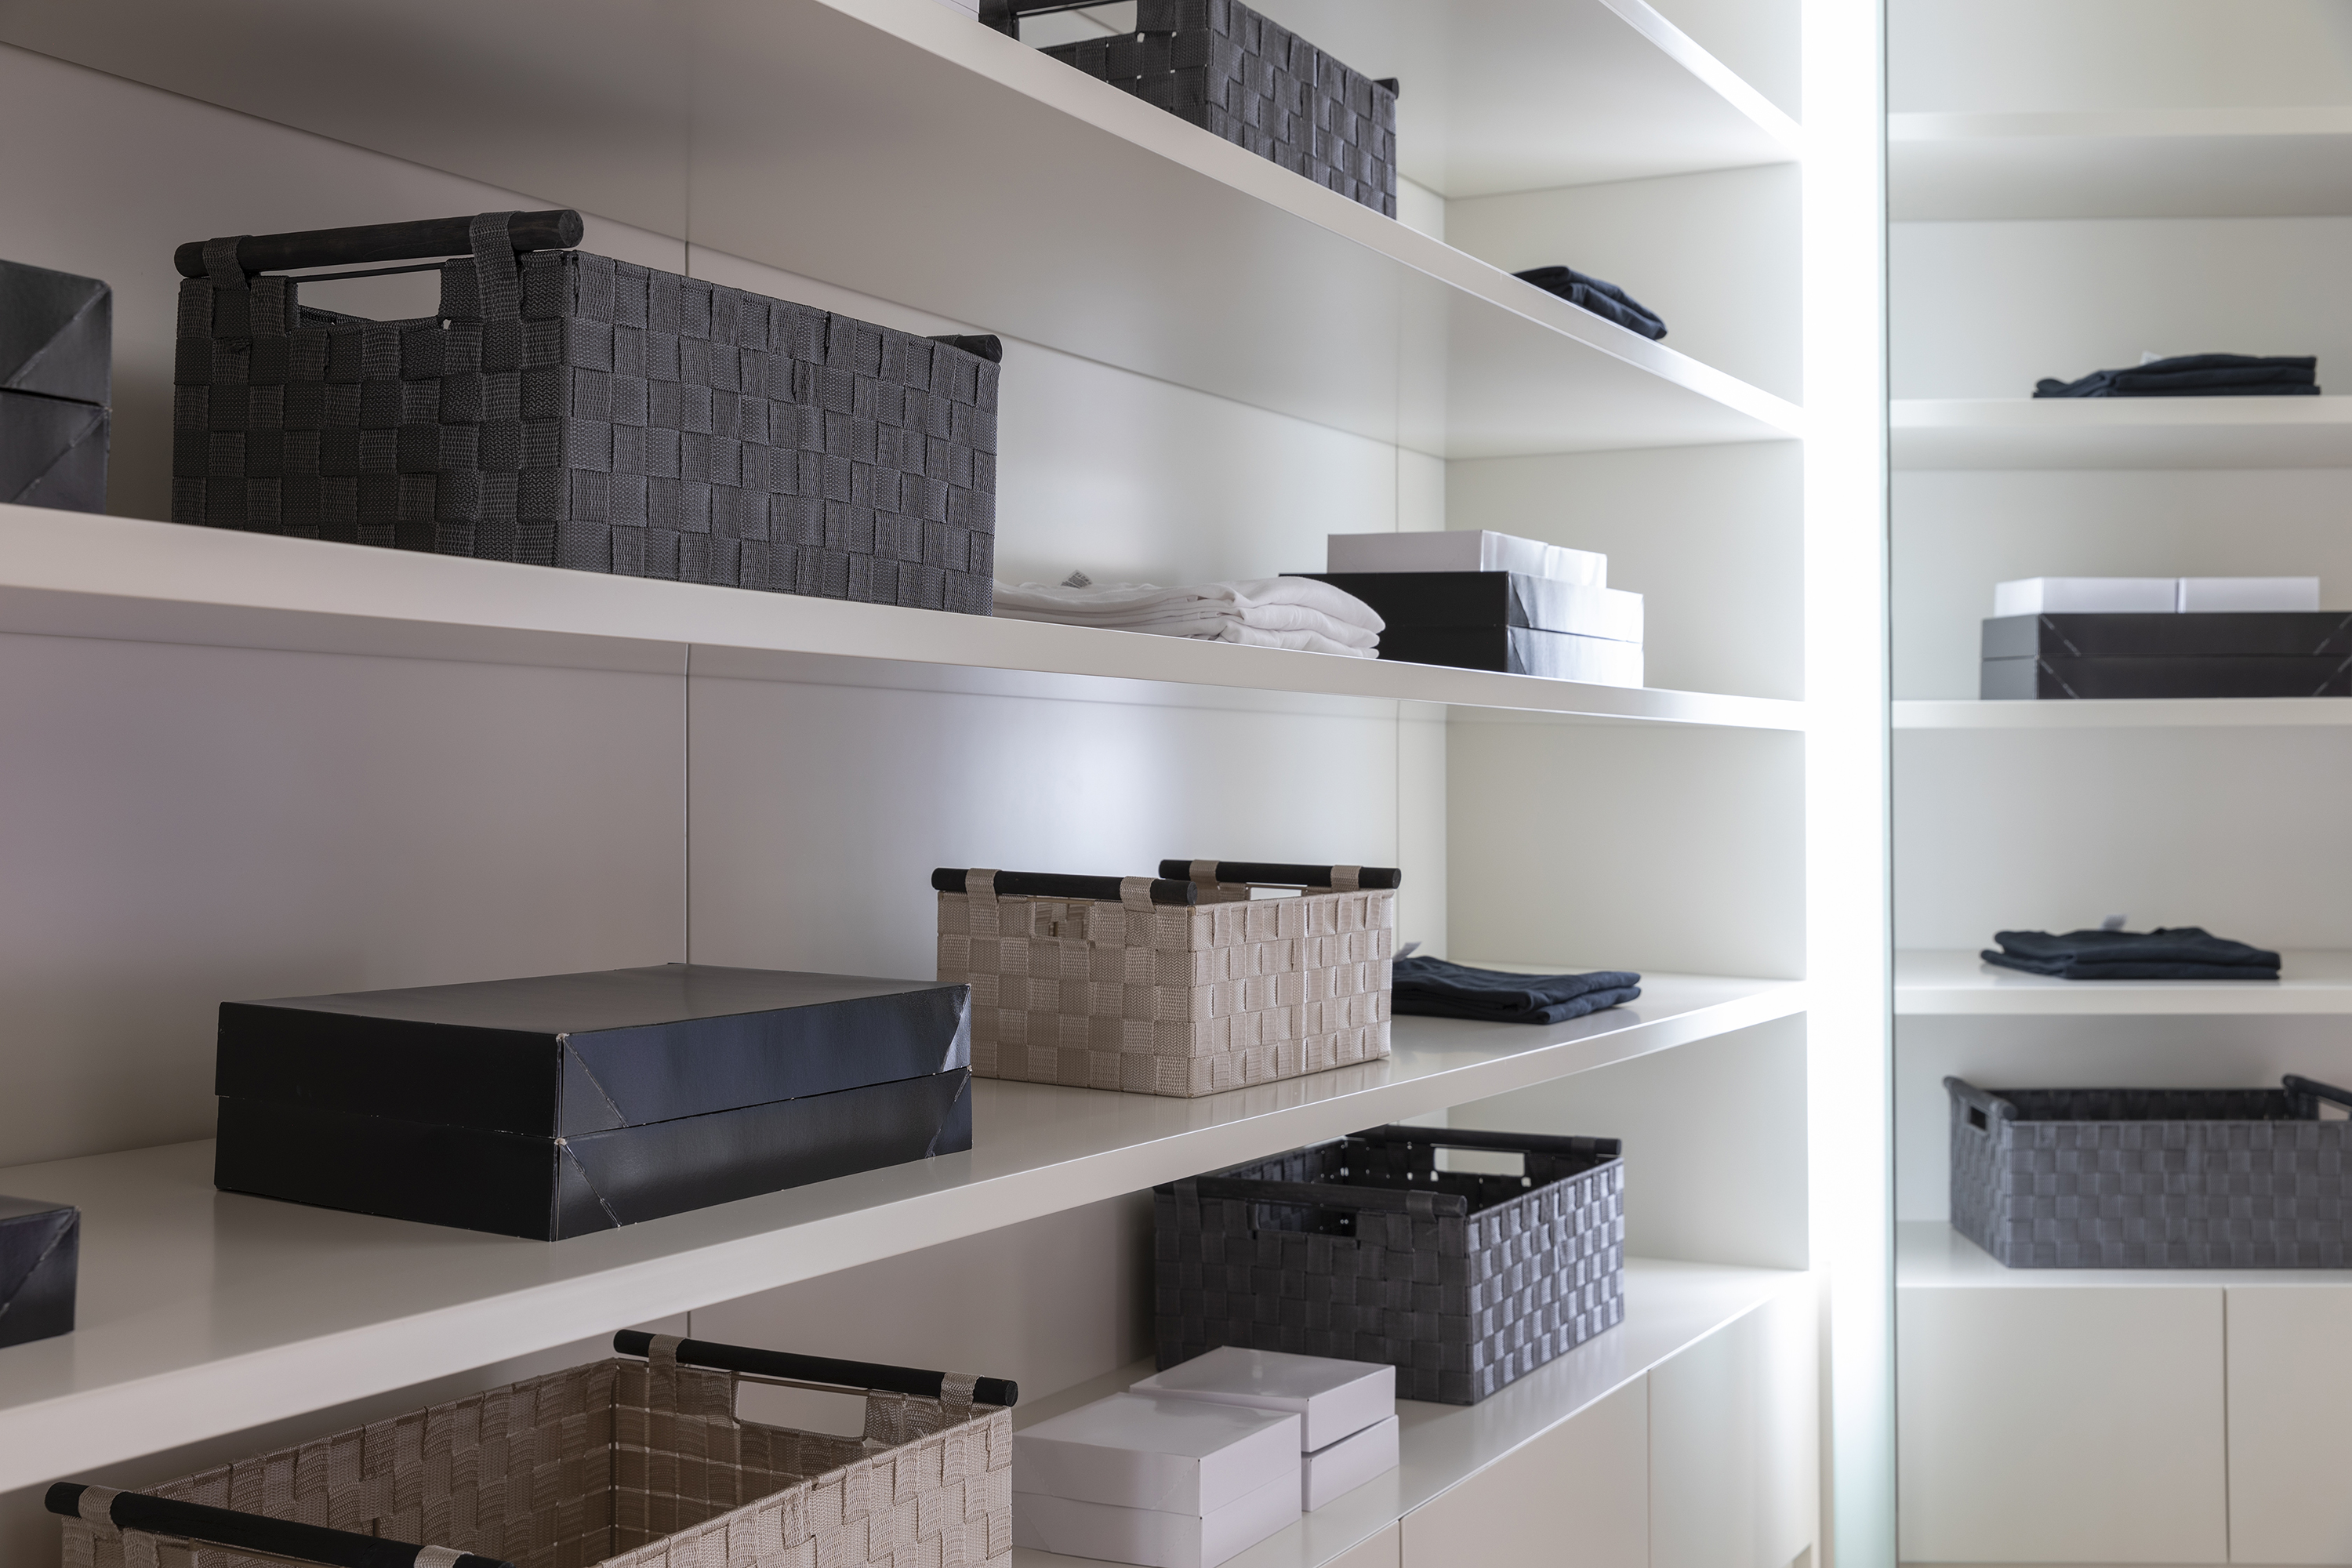 Bins and baskets help to conceal smaller closet items.